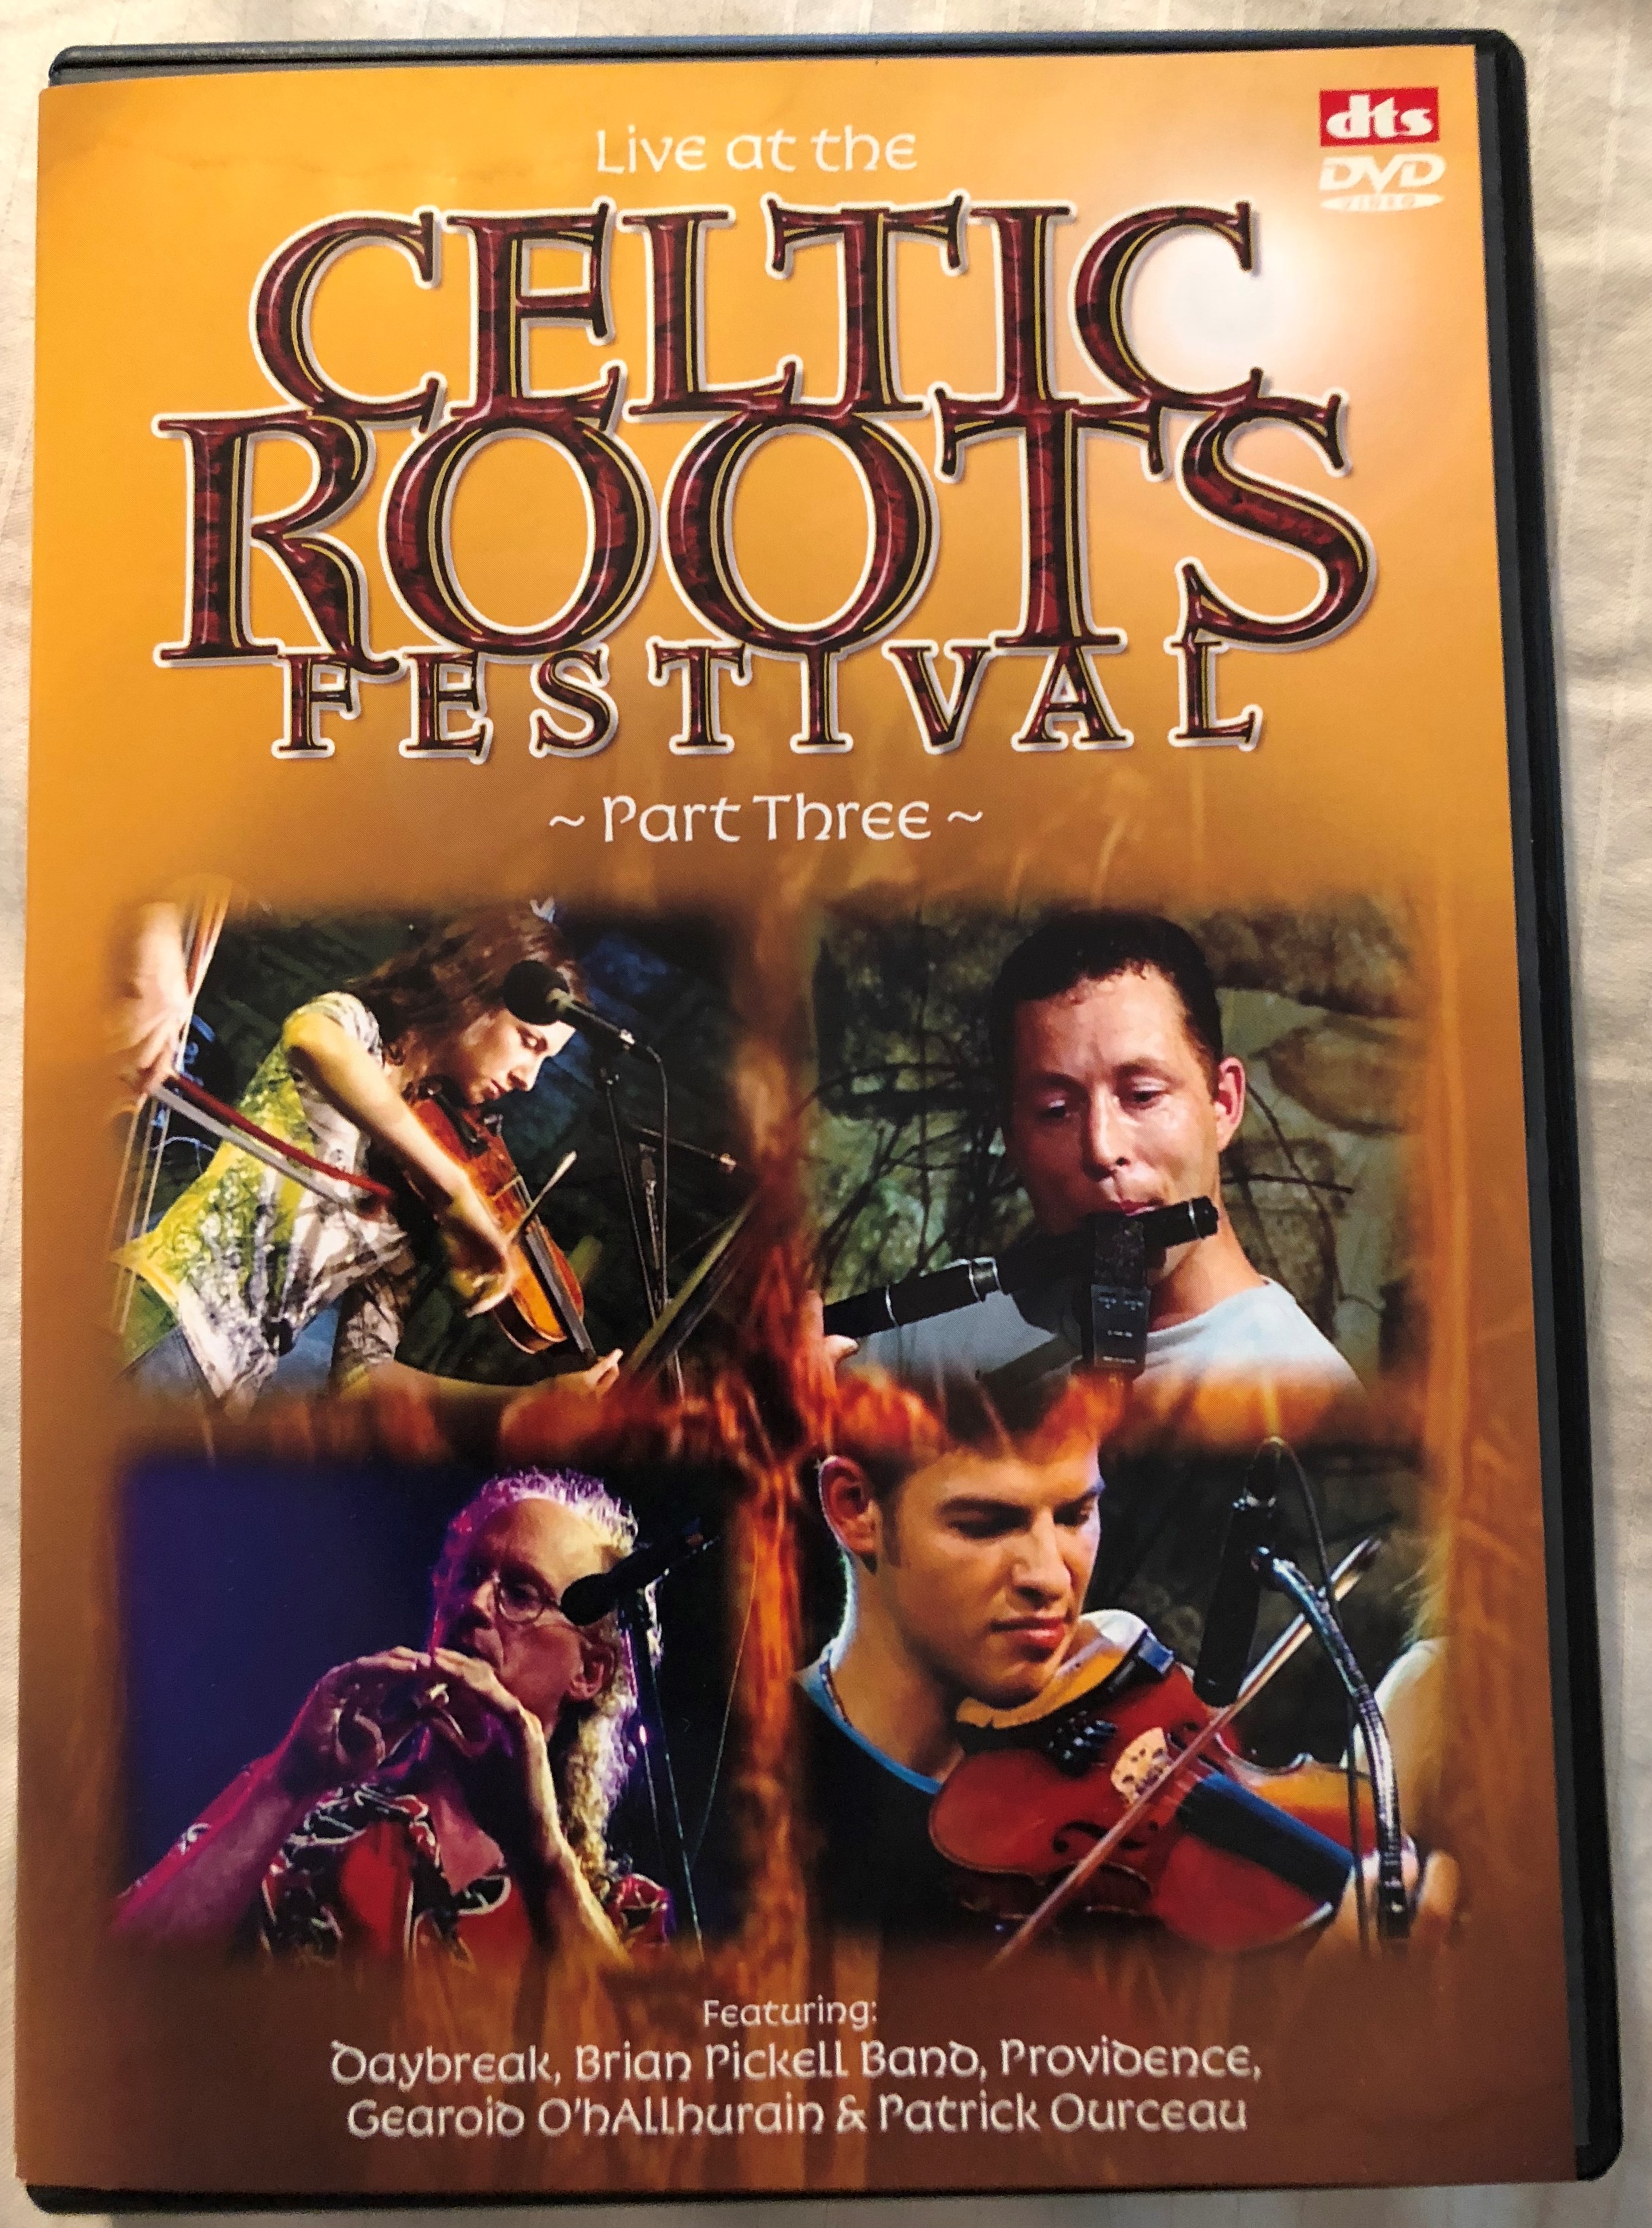 live-at-the-celtic-roots-festival-part-three-dvd-featuring-daybreak-brian-pickell-band-providence-gearoid-o.-hallhurain-patrick-ourceau-1-.jpg